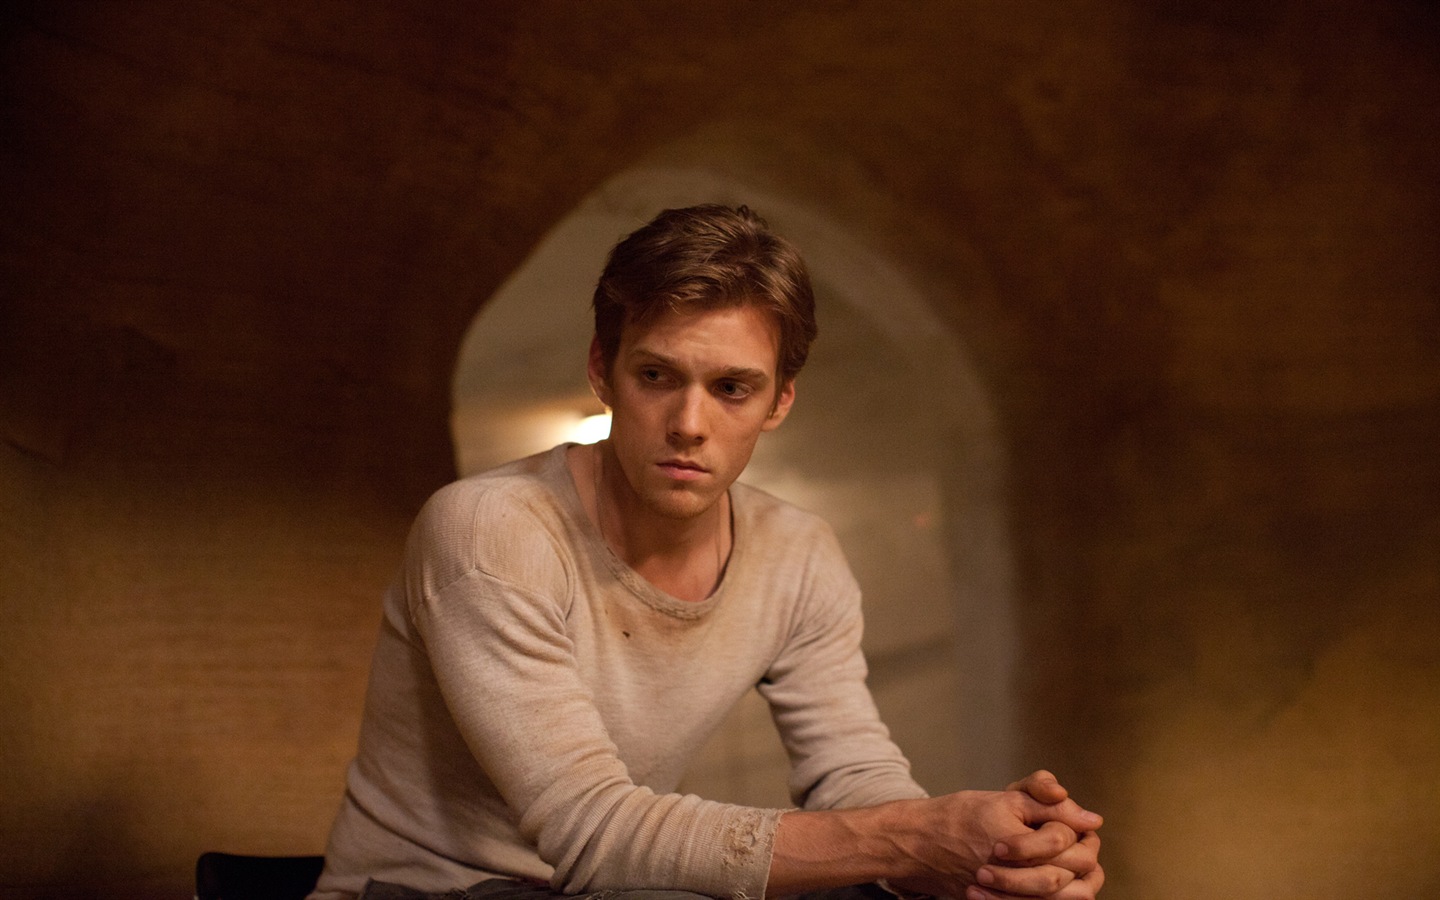 The Host 2013 movie HD wallpapers #7 - 1440x900